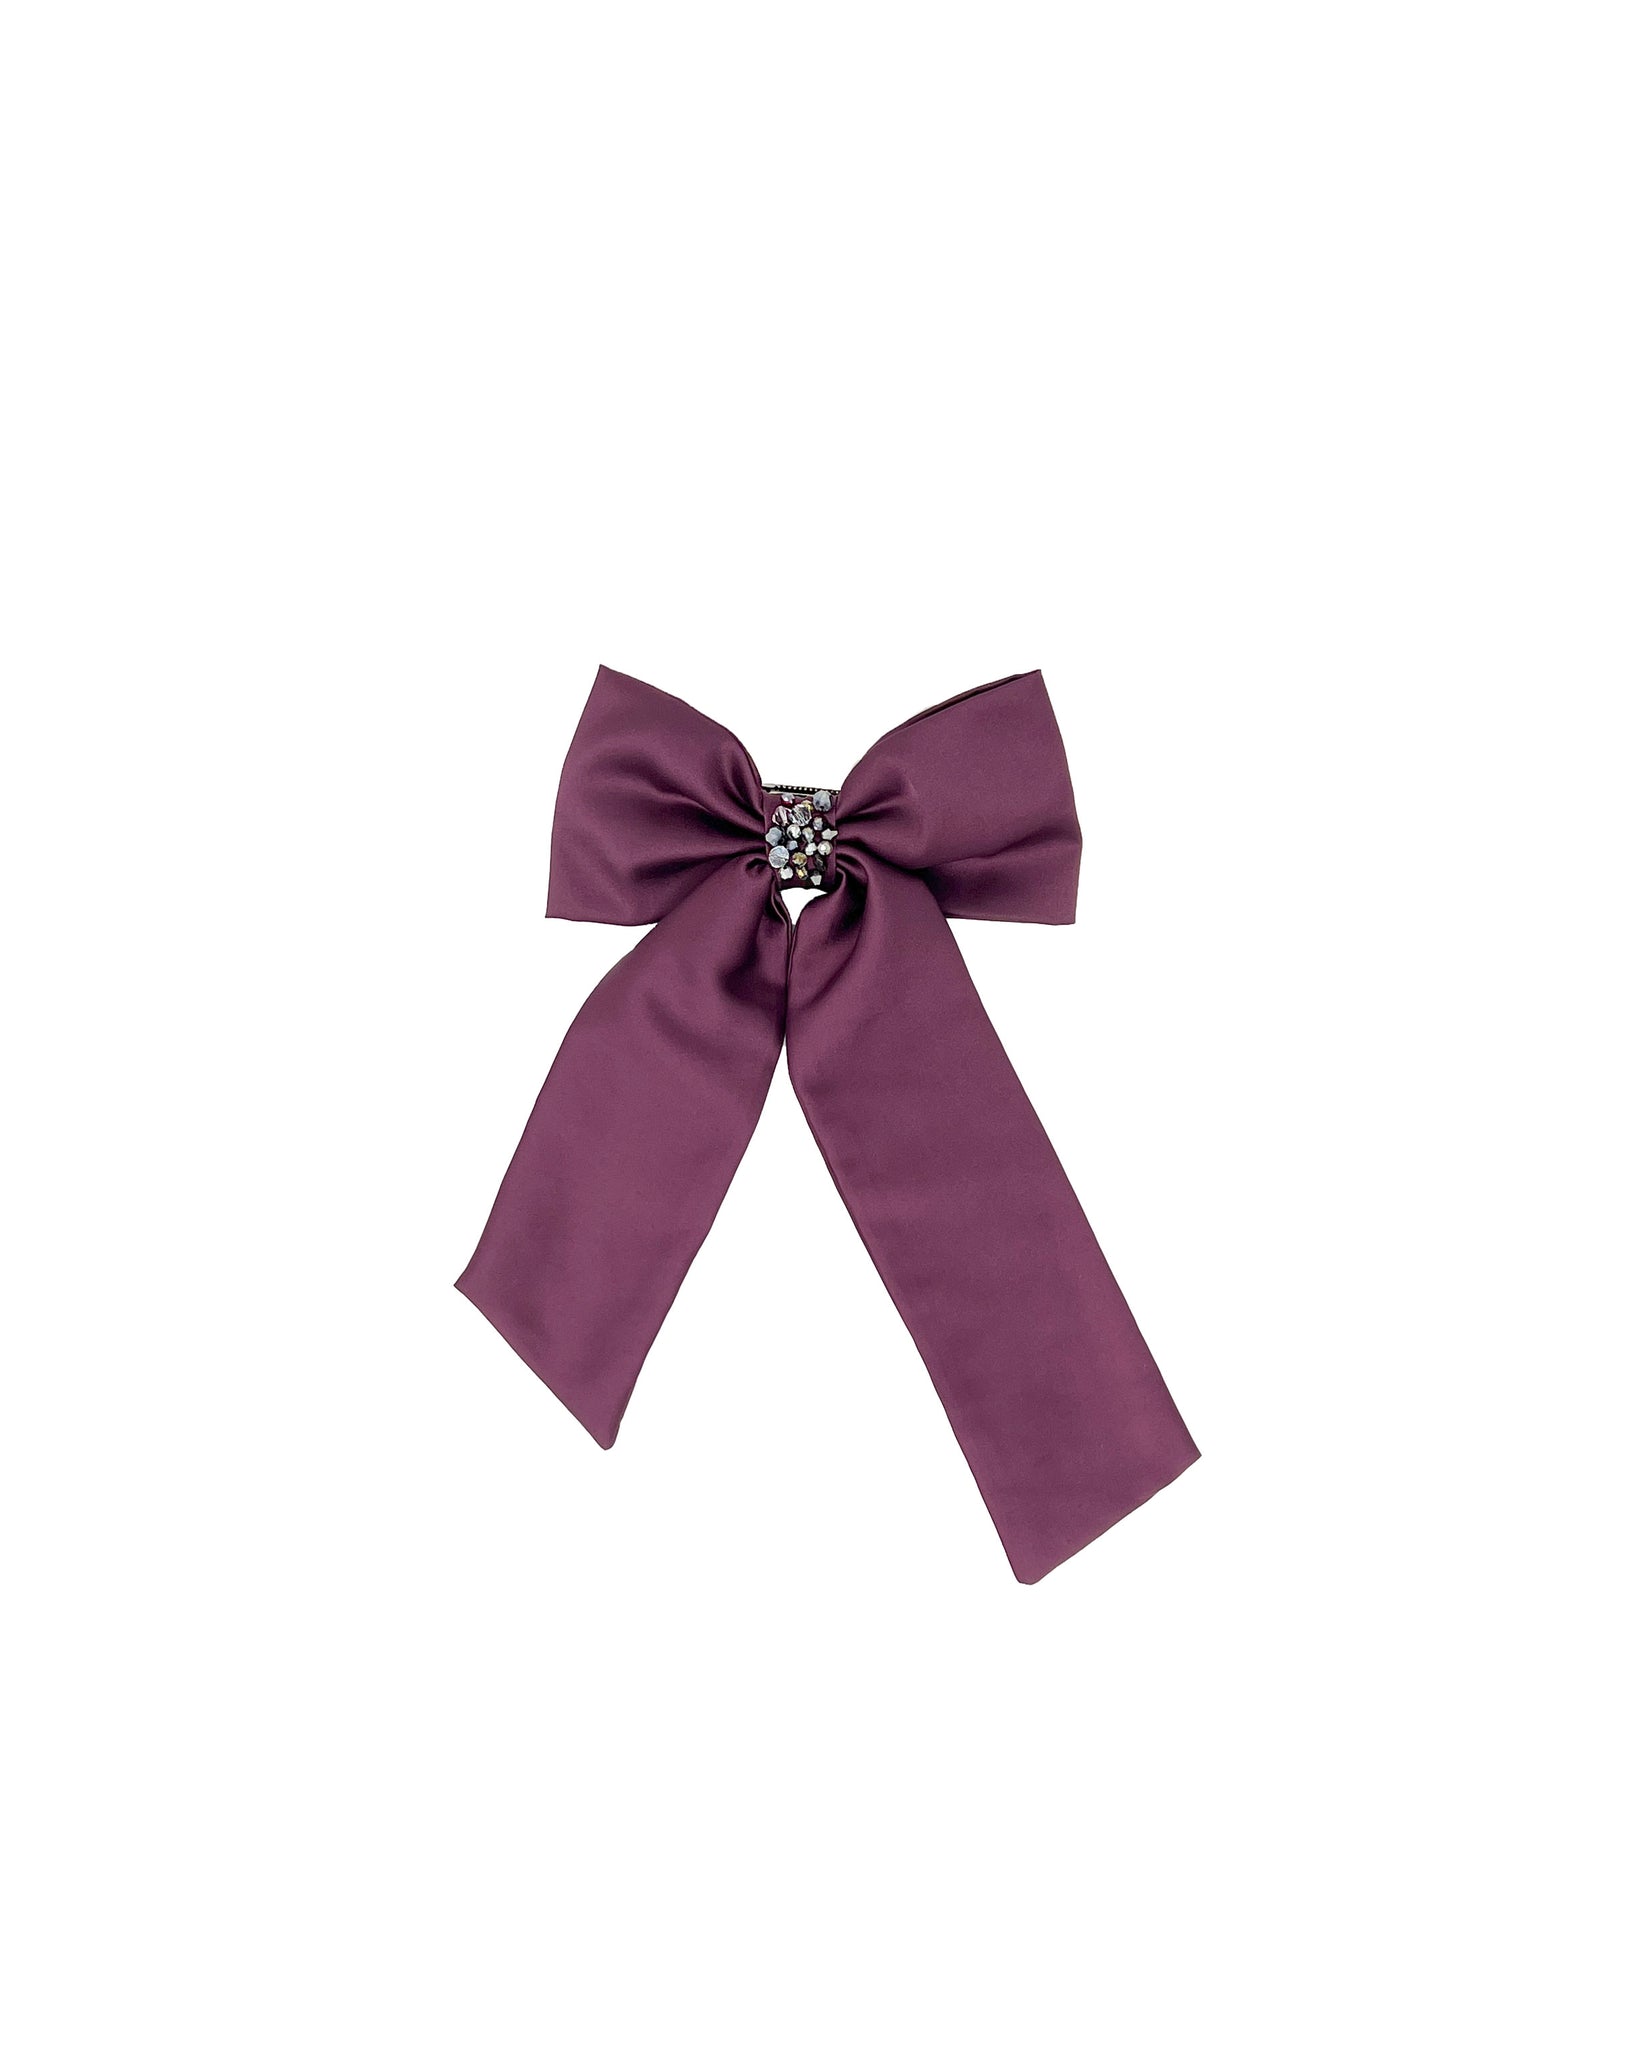 Dark purple satin bow clip with embroidered central knot